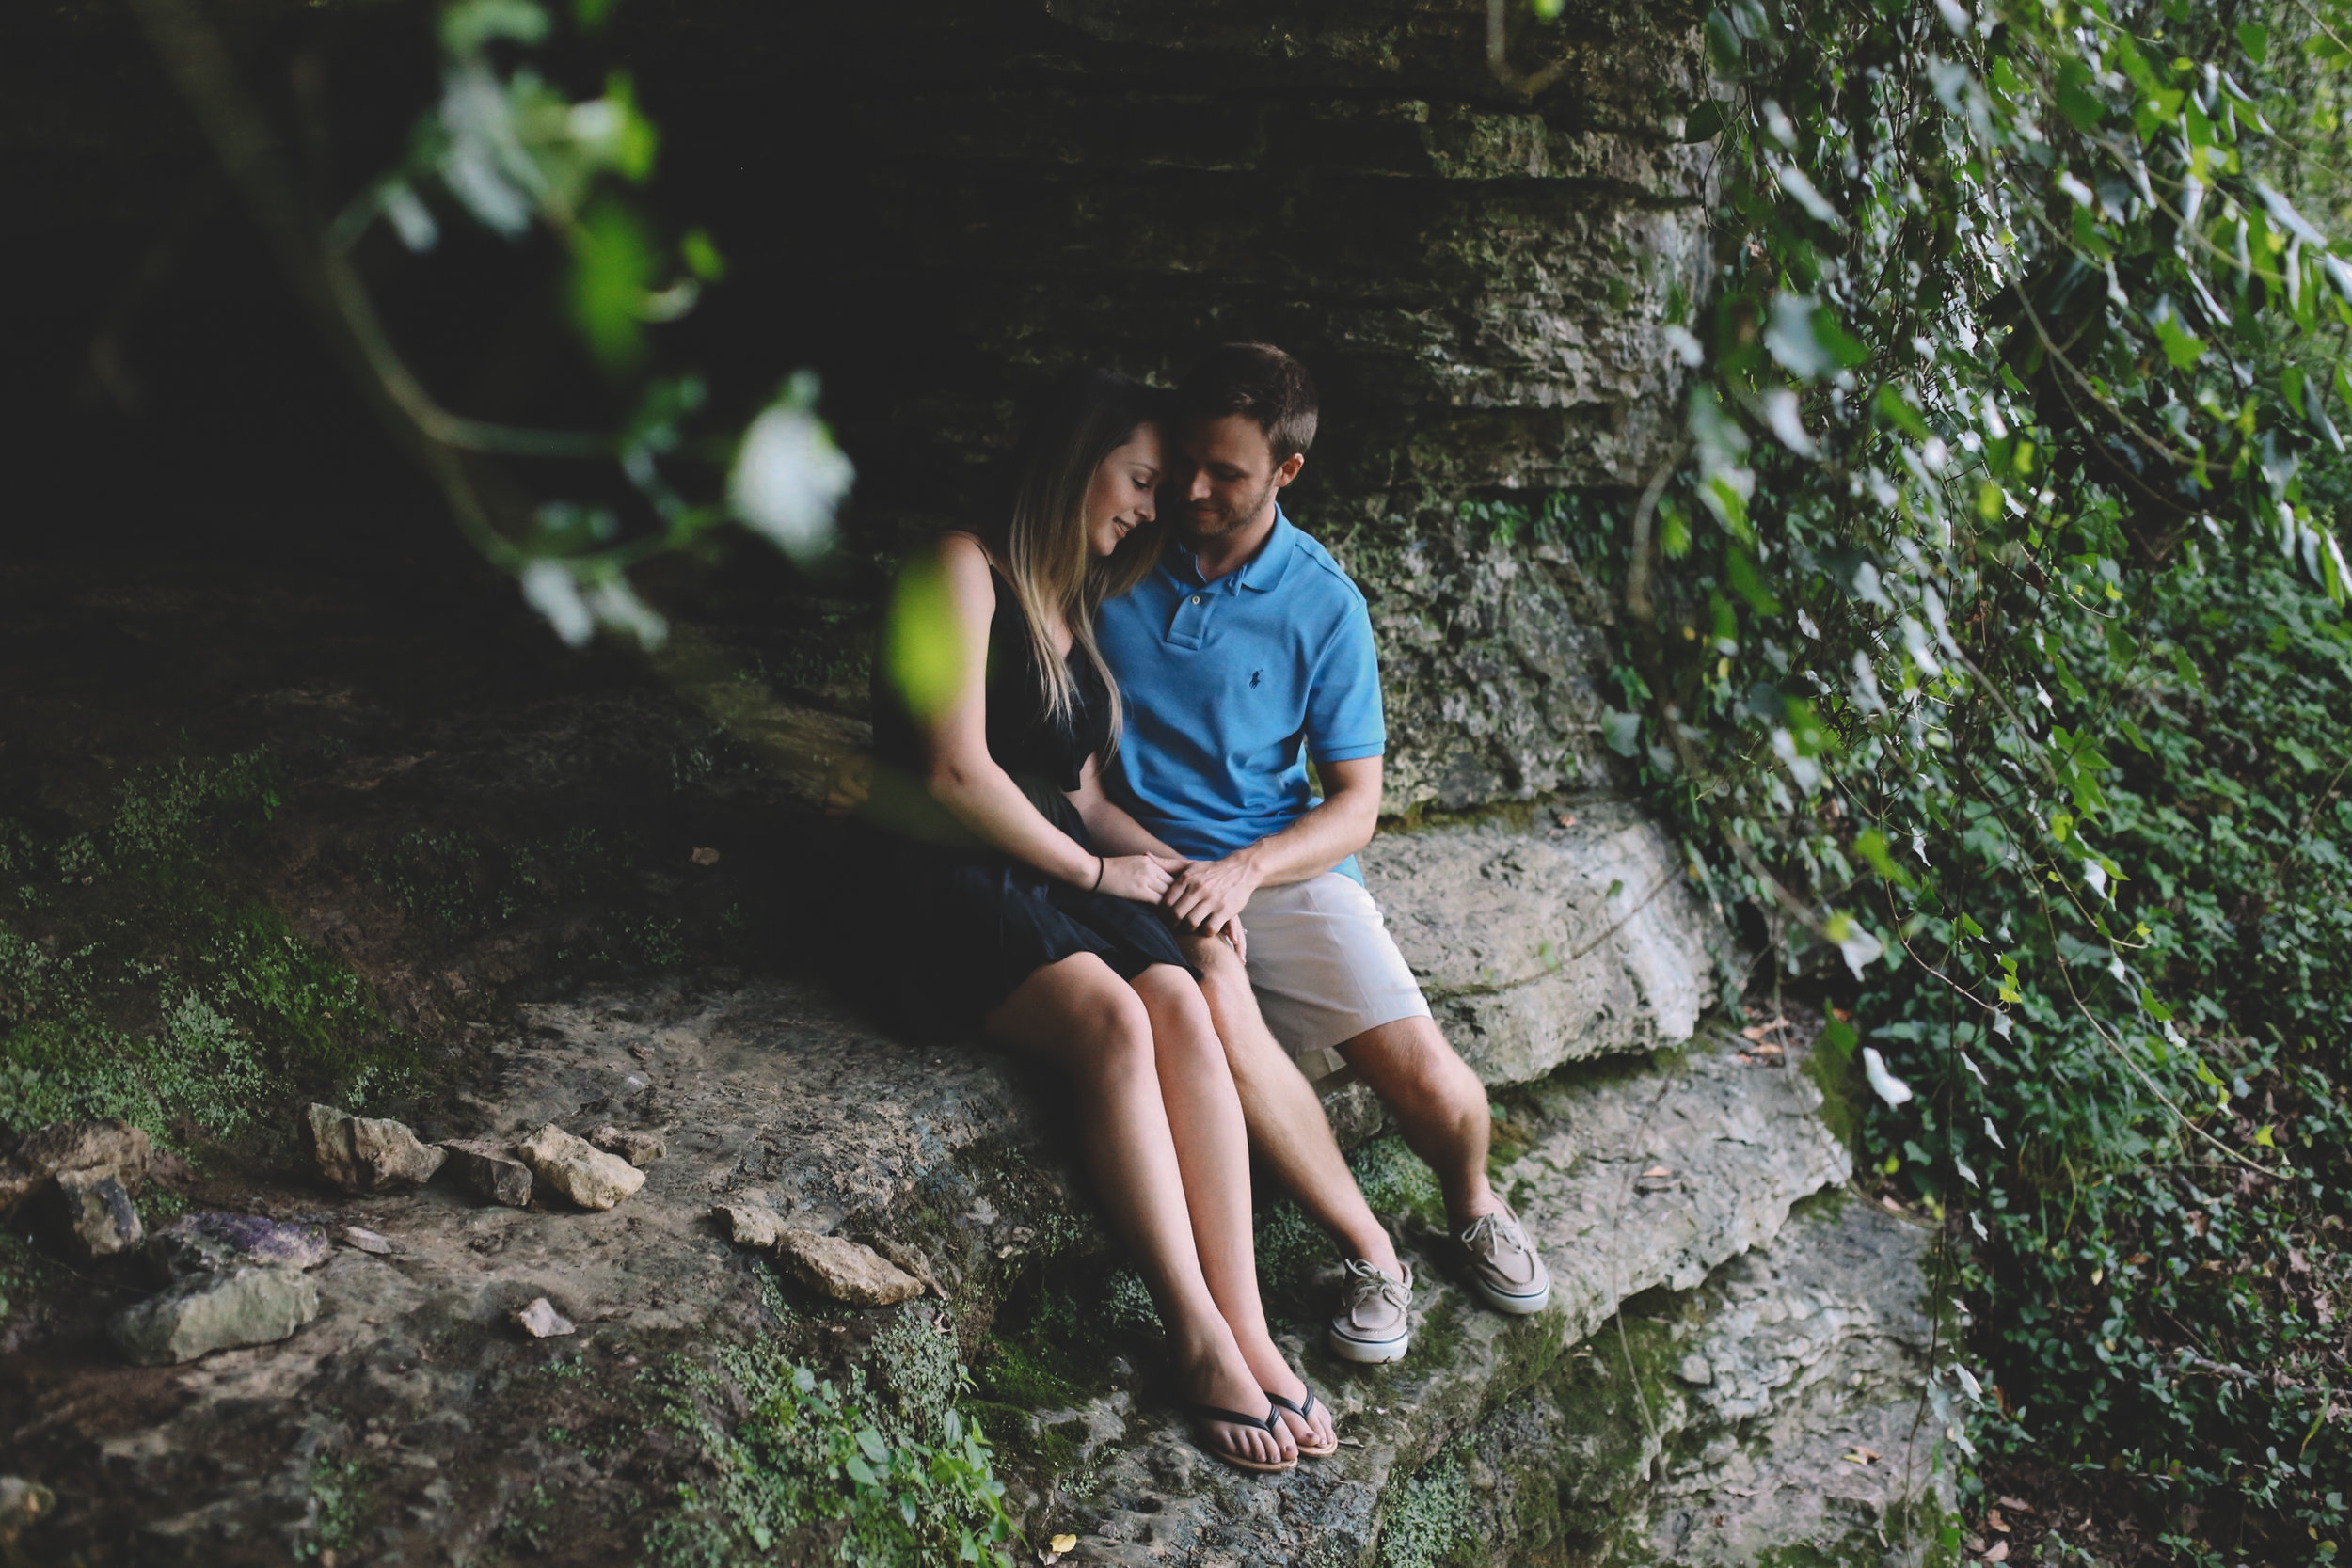 Elizabeth + Mitch Engagement Photo Session - Cherokee Park - Louisville, KY - Again We Say Rejoice Photography (43 of 173).jpg